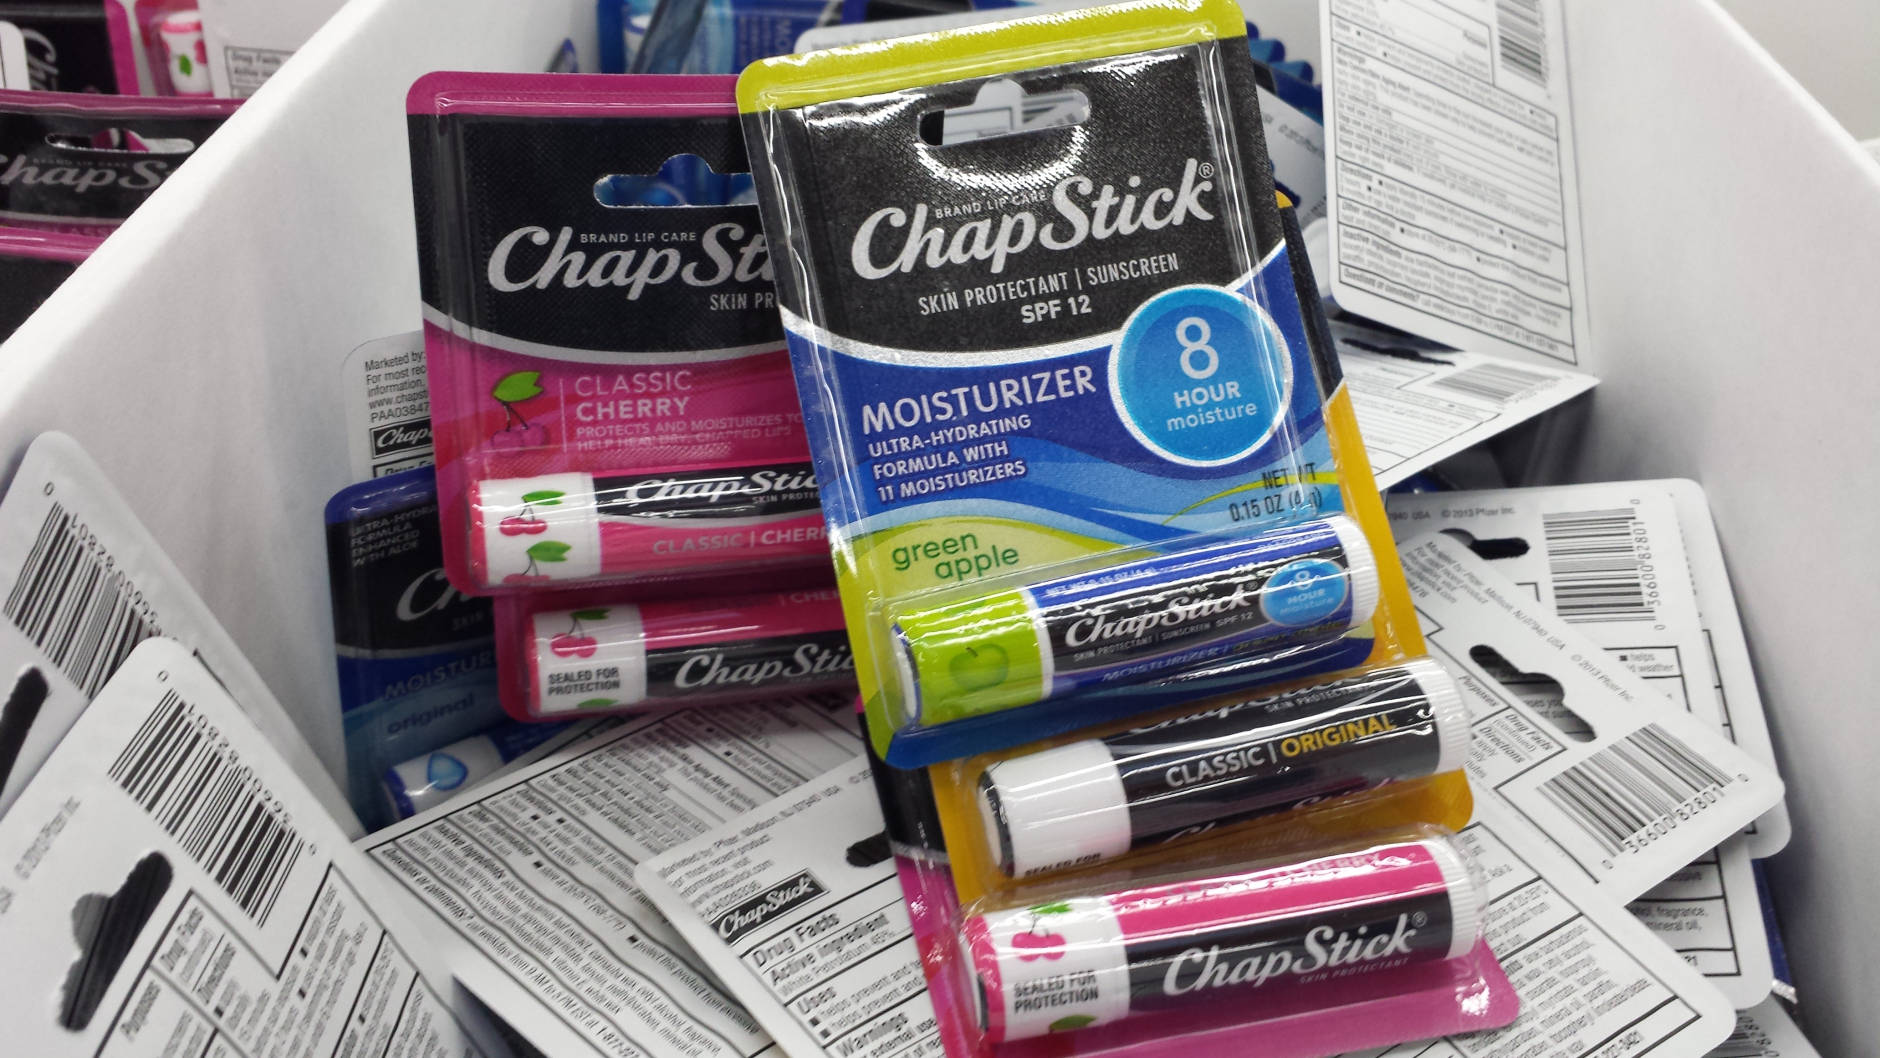 Other ChapStick